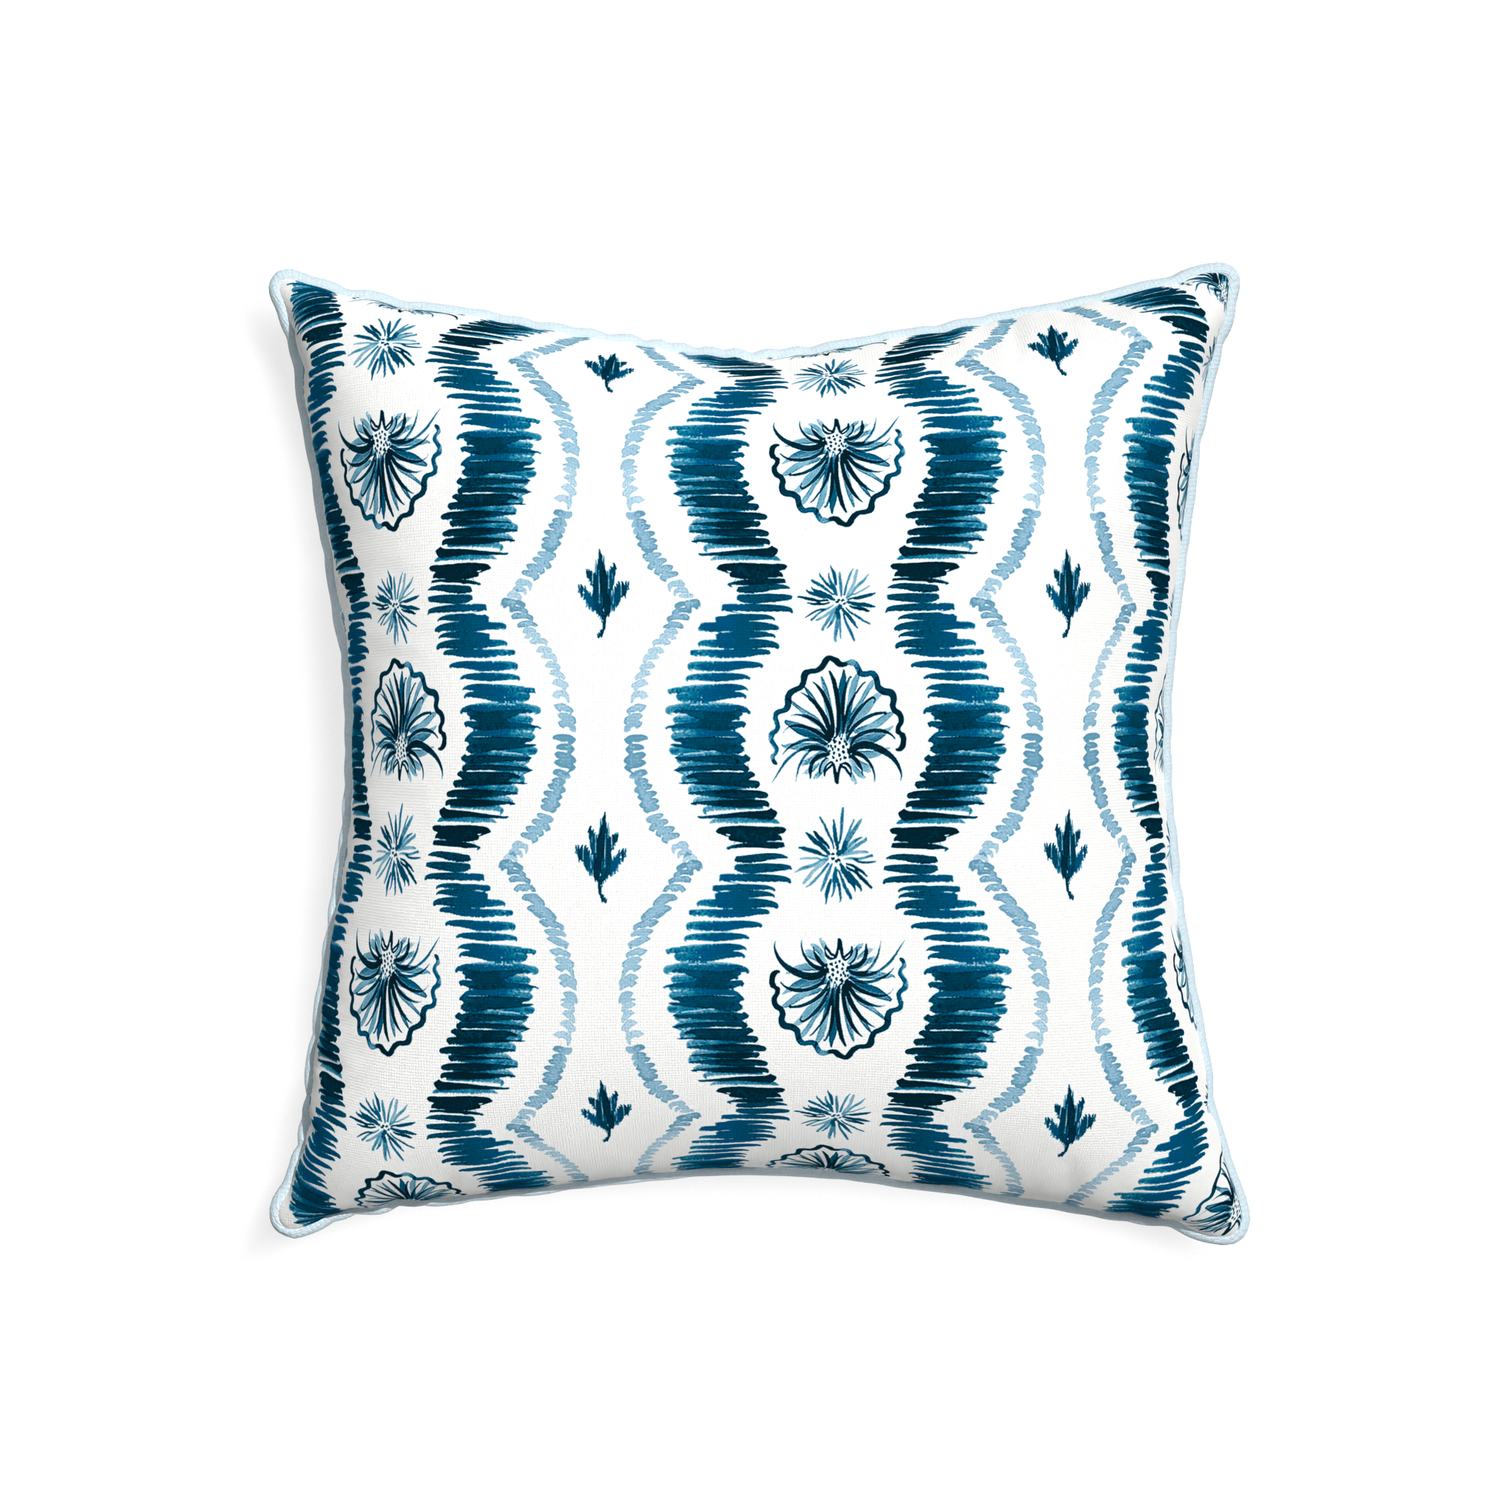 22-square alice custom blue ikatpillow with powder piping on white background